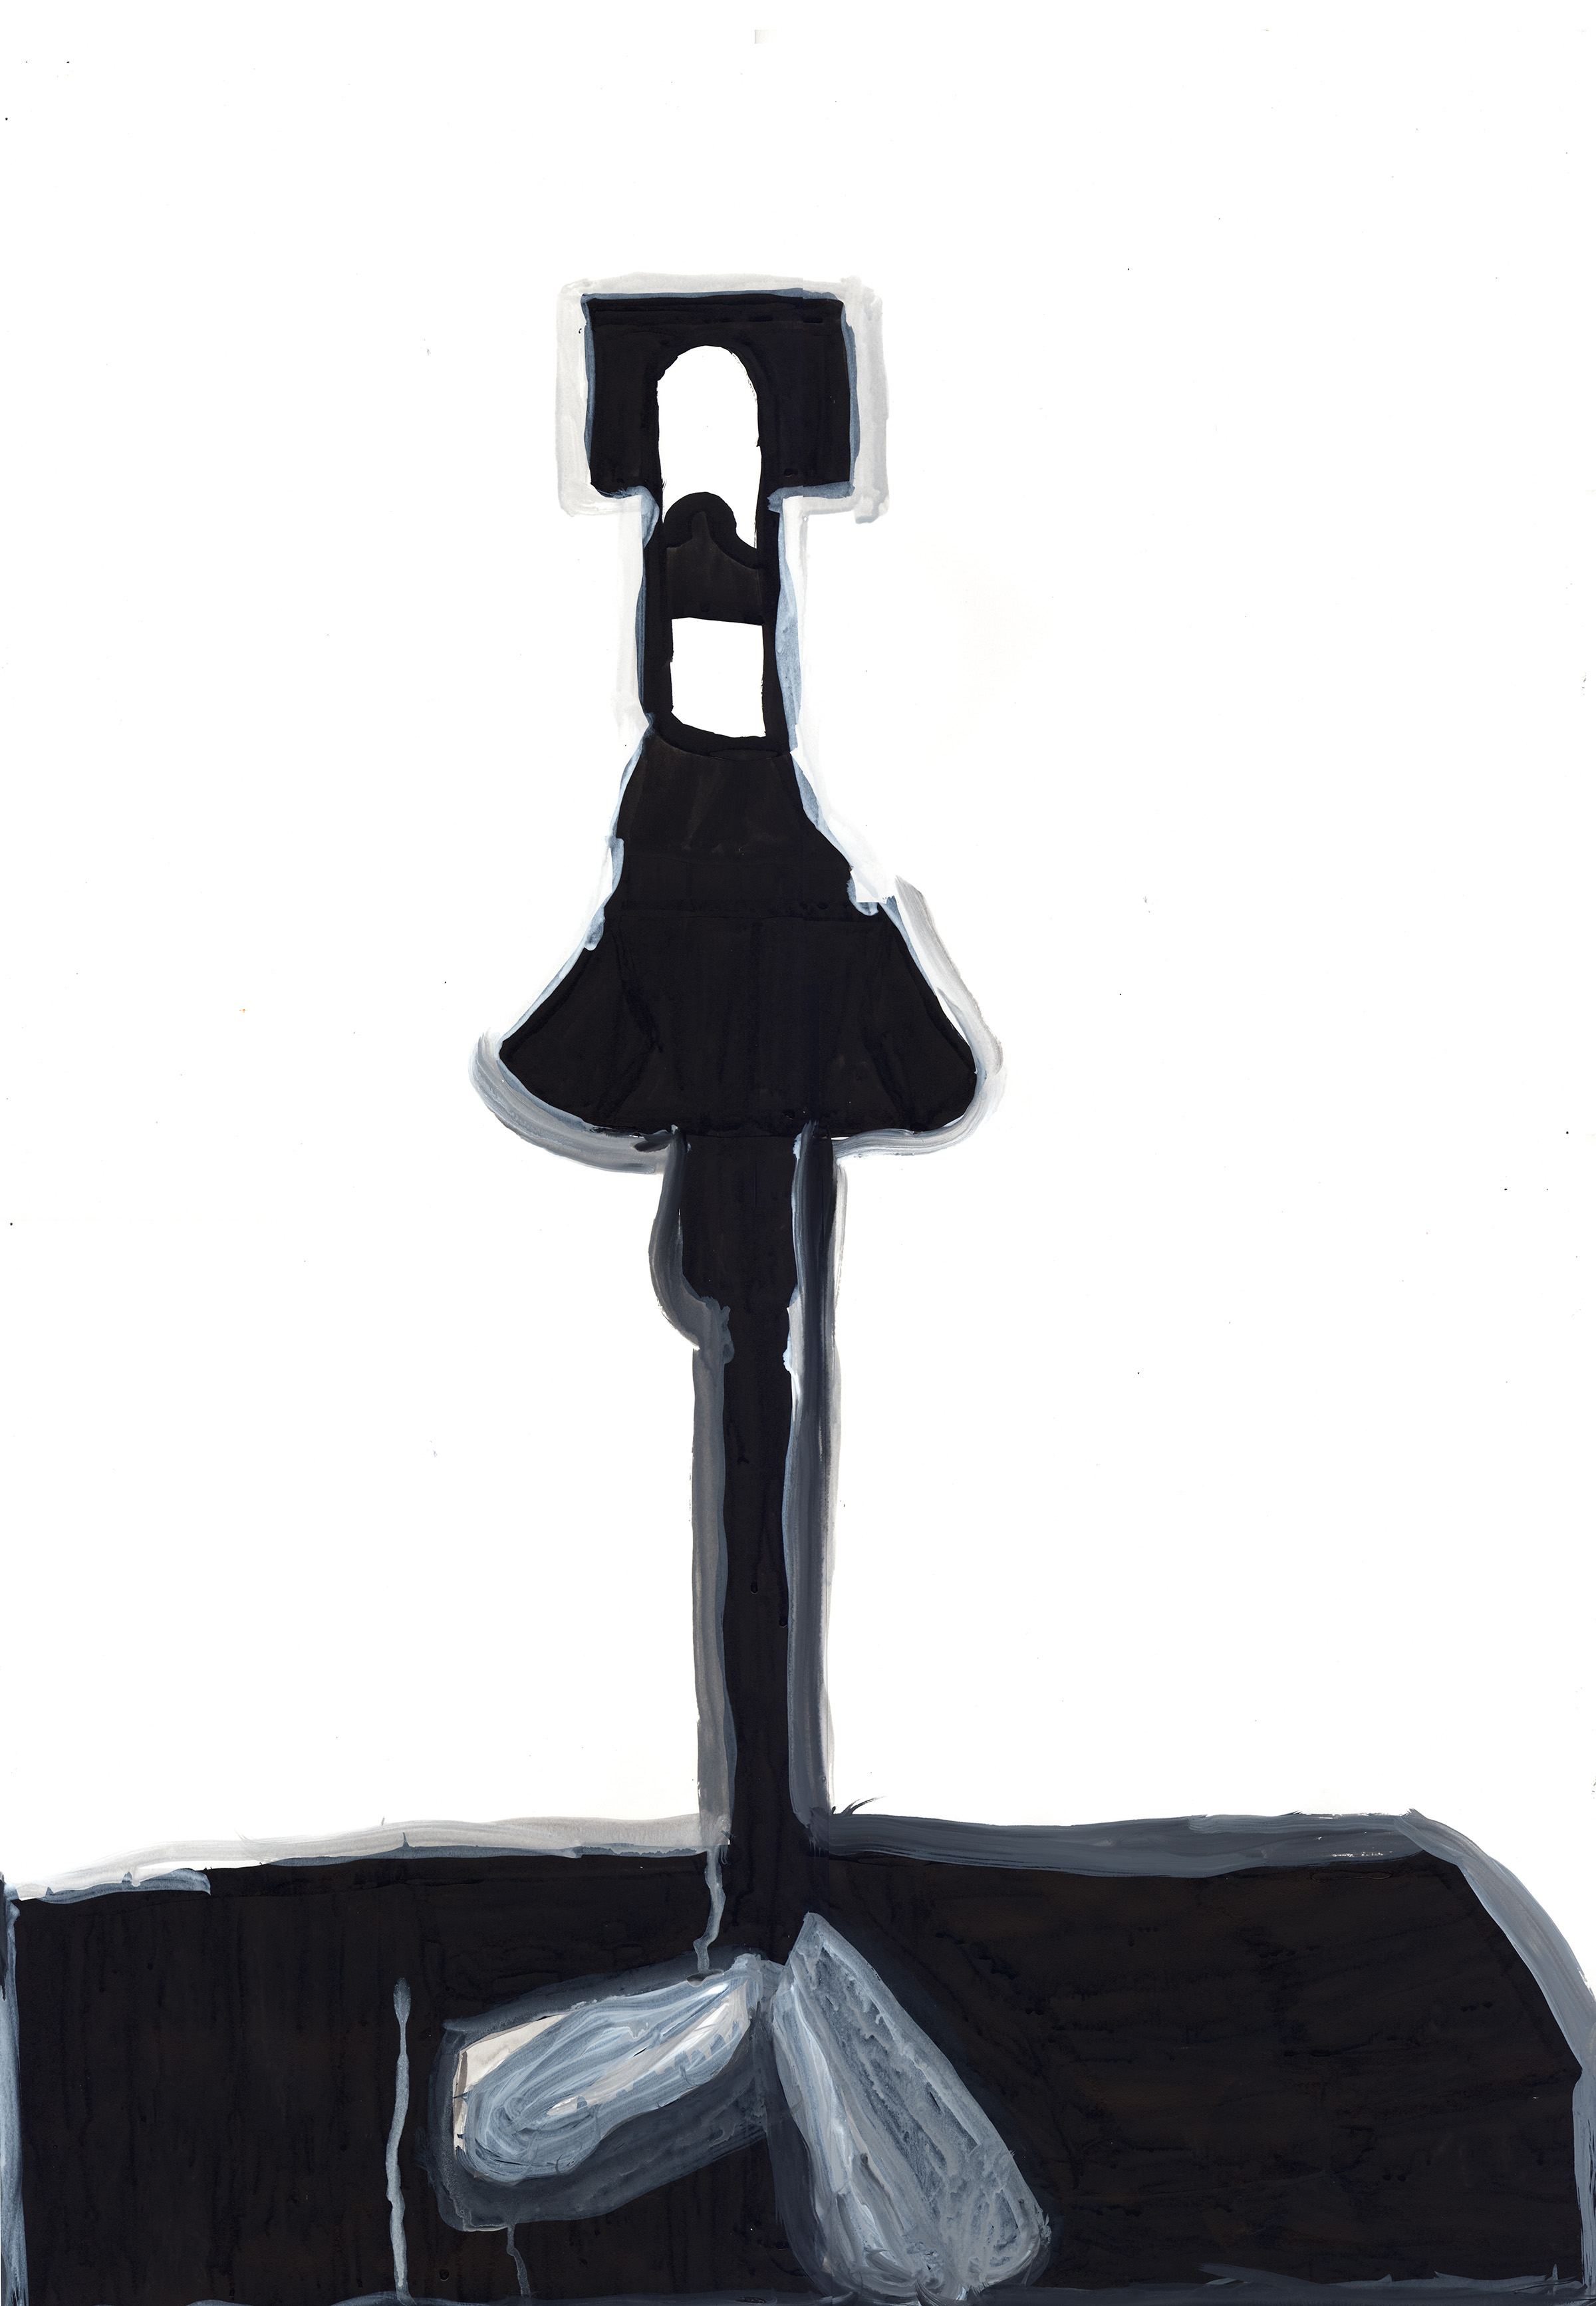 Ntiense Eno-Amooquaye, Microphone and Stand, 2018, Ink on paper (Ntiense Eno-Amooquaye 0)